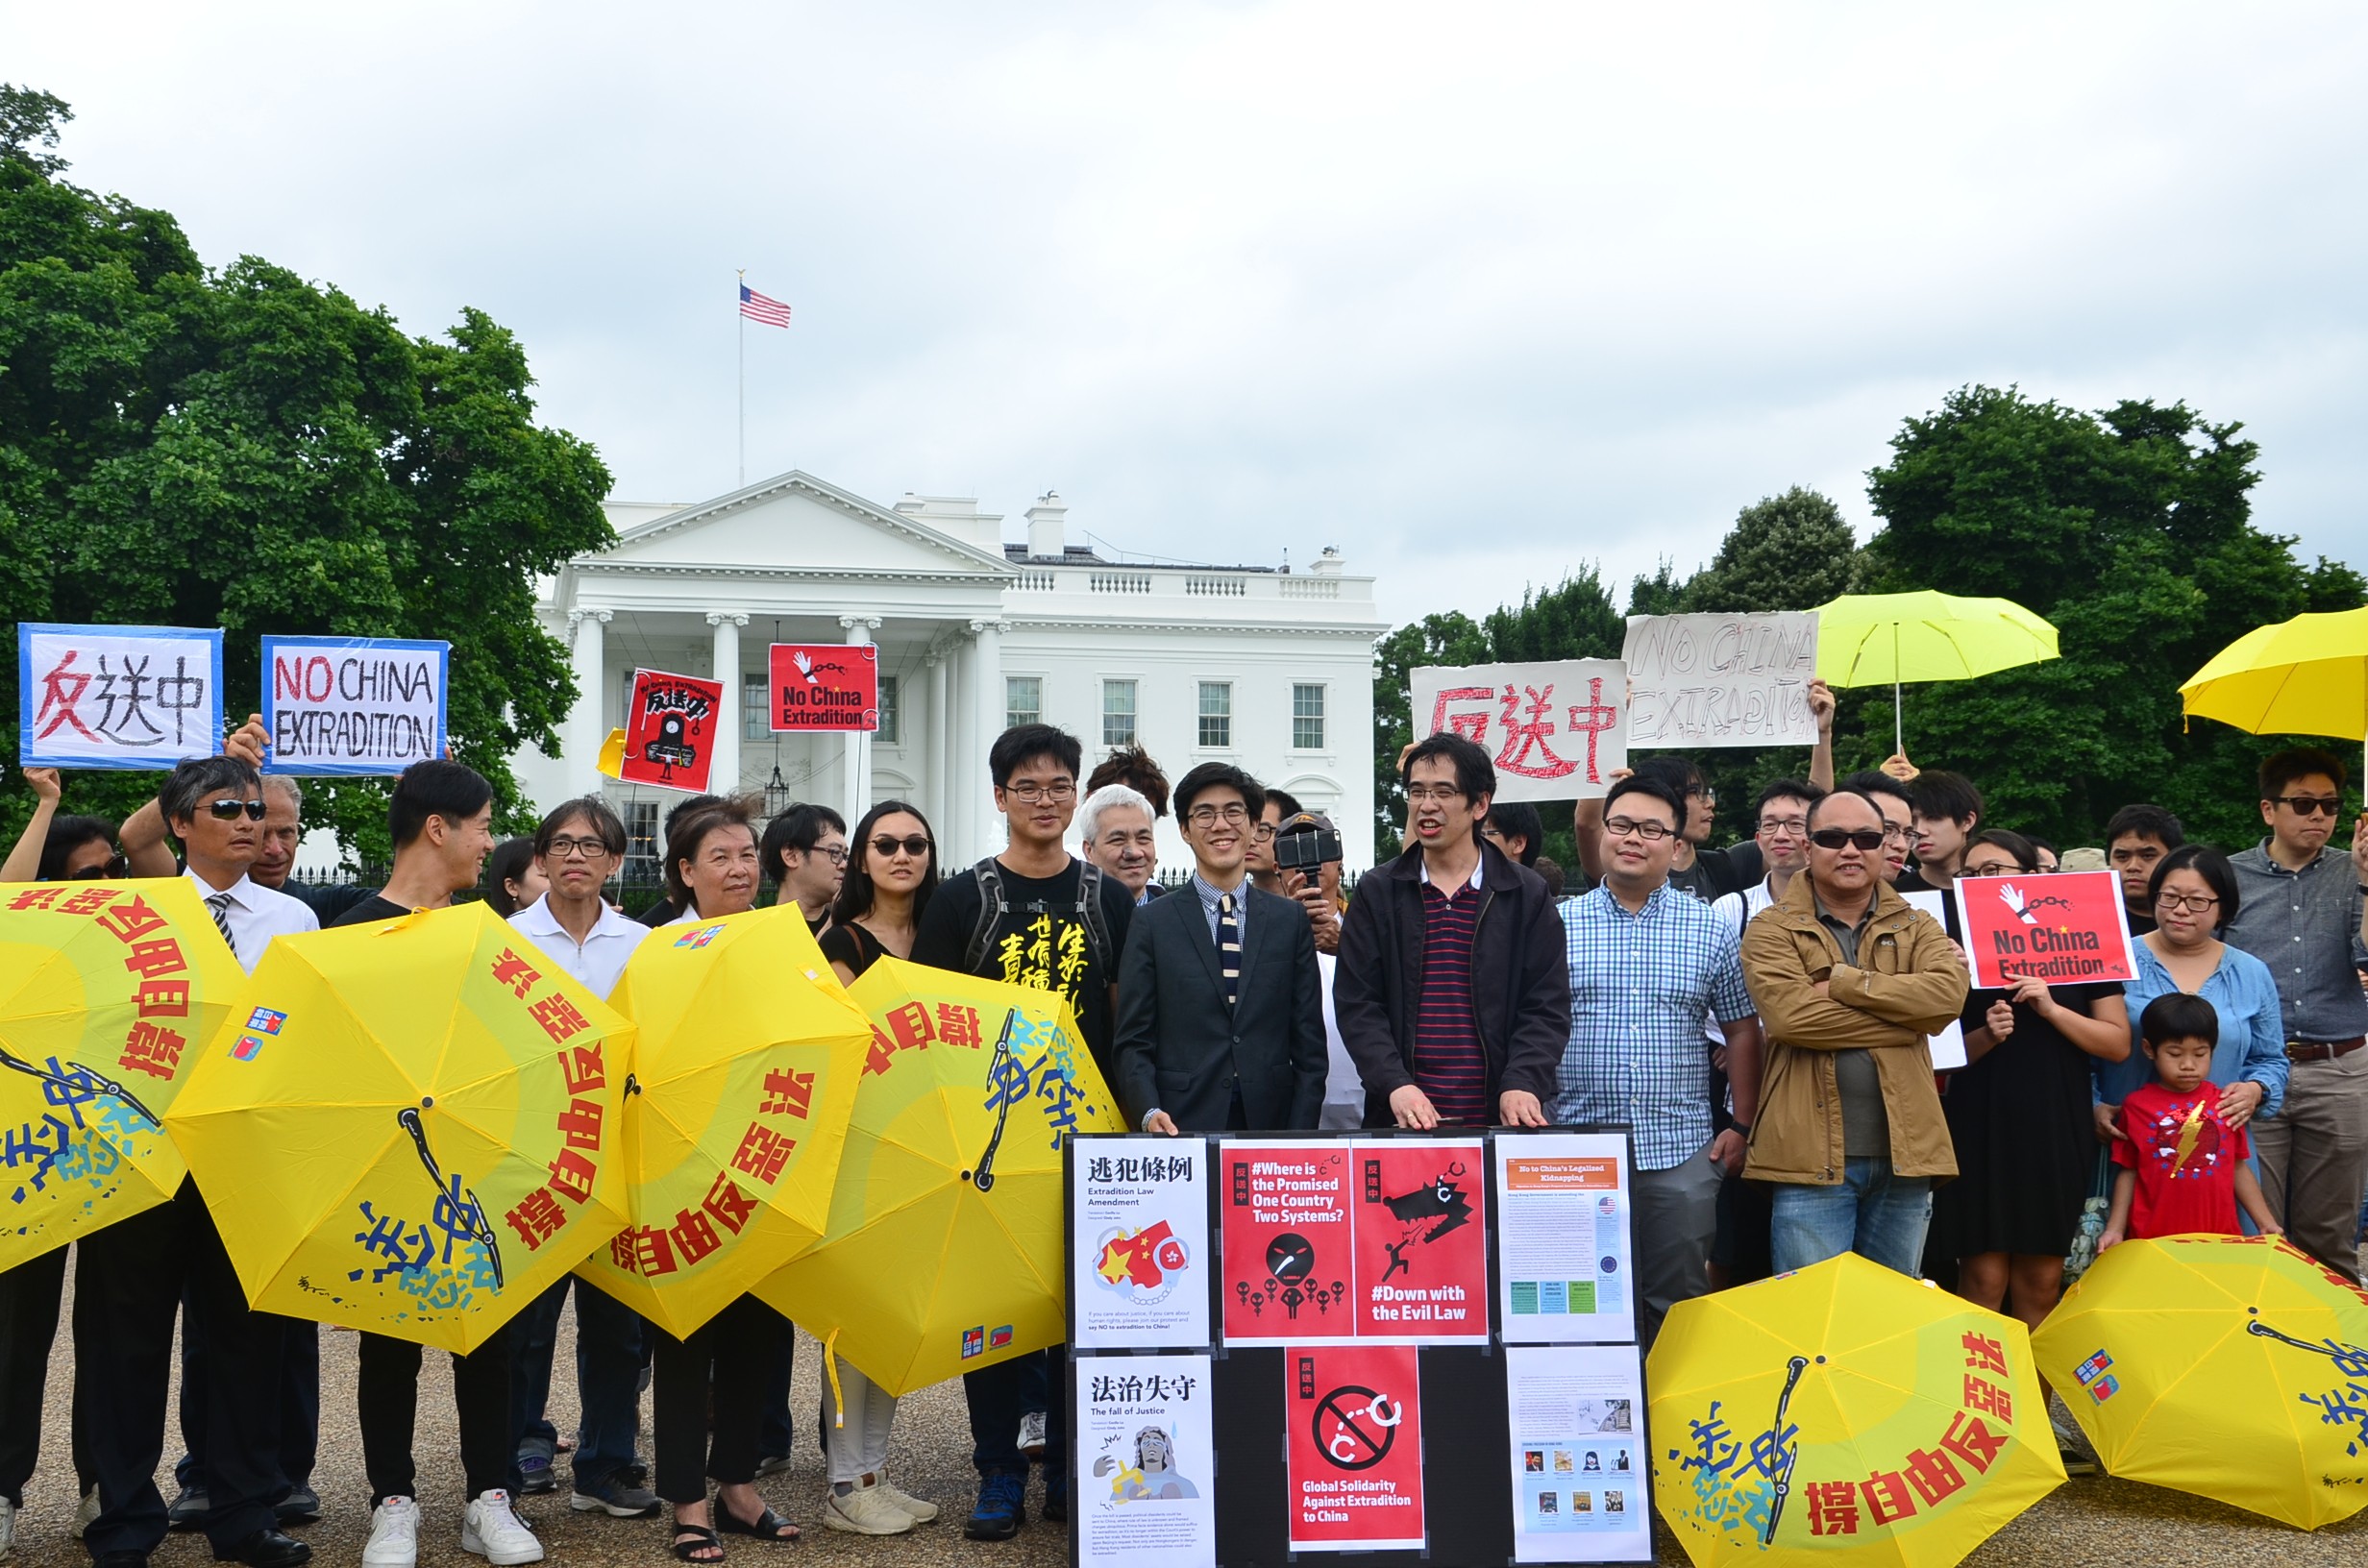 Dozens of people protested against Hong Kong's extradition bill outside the White House in Washington on Sunday. Photo: SCMP / Nectar Gan